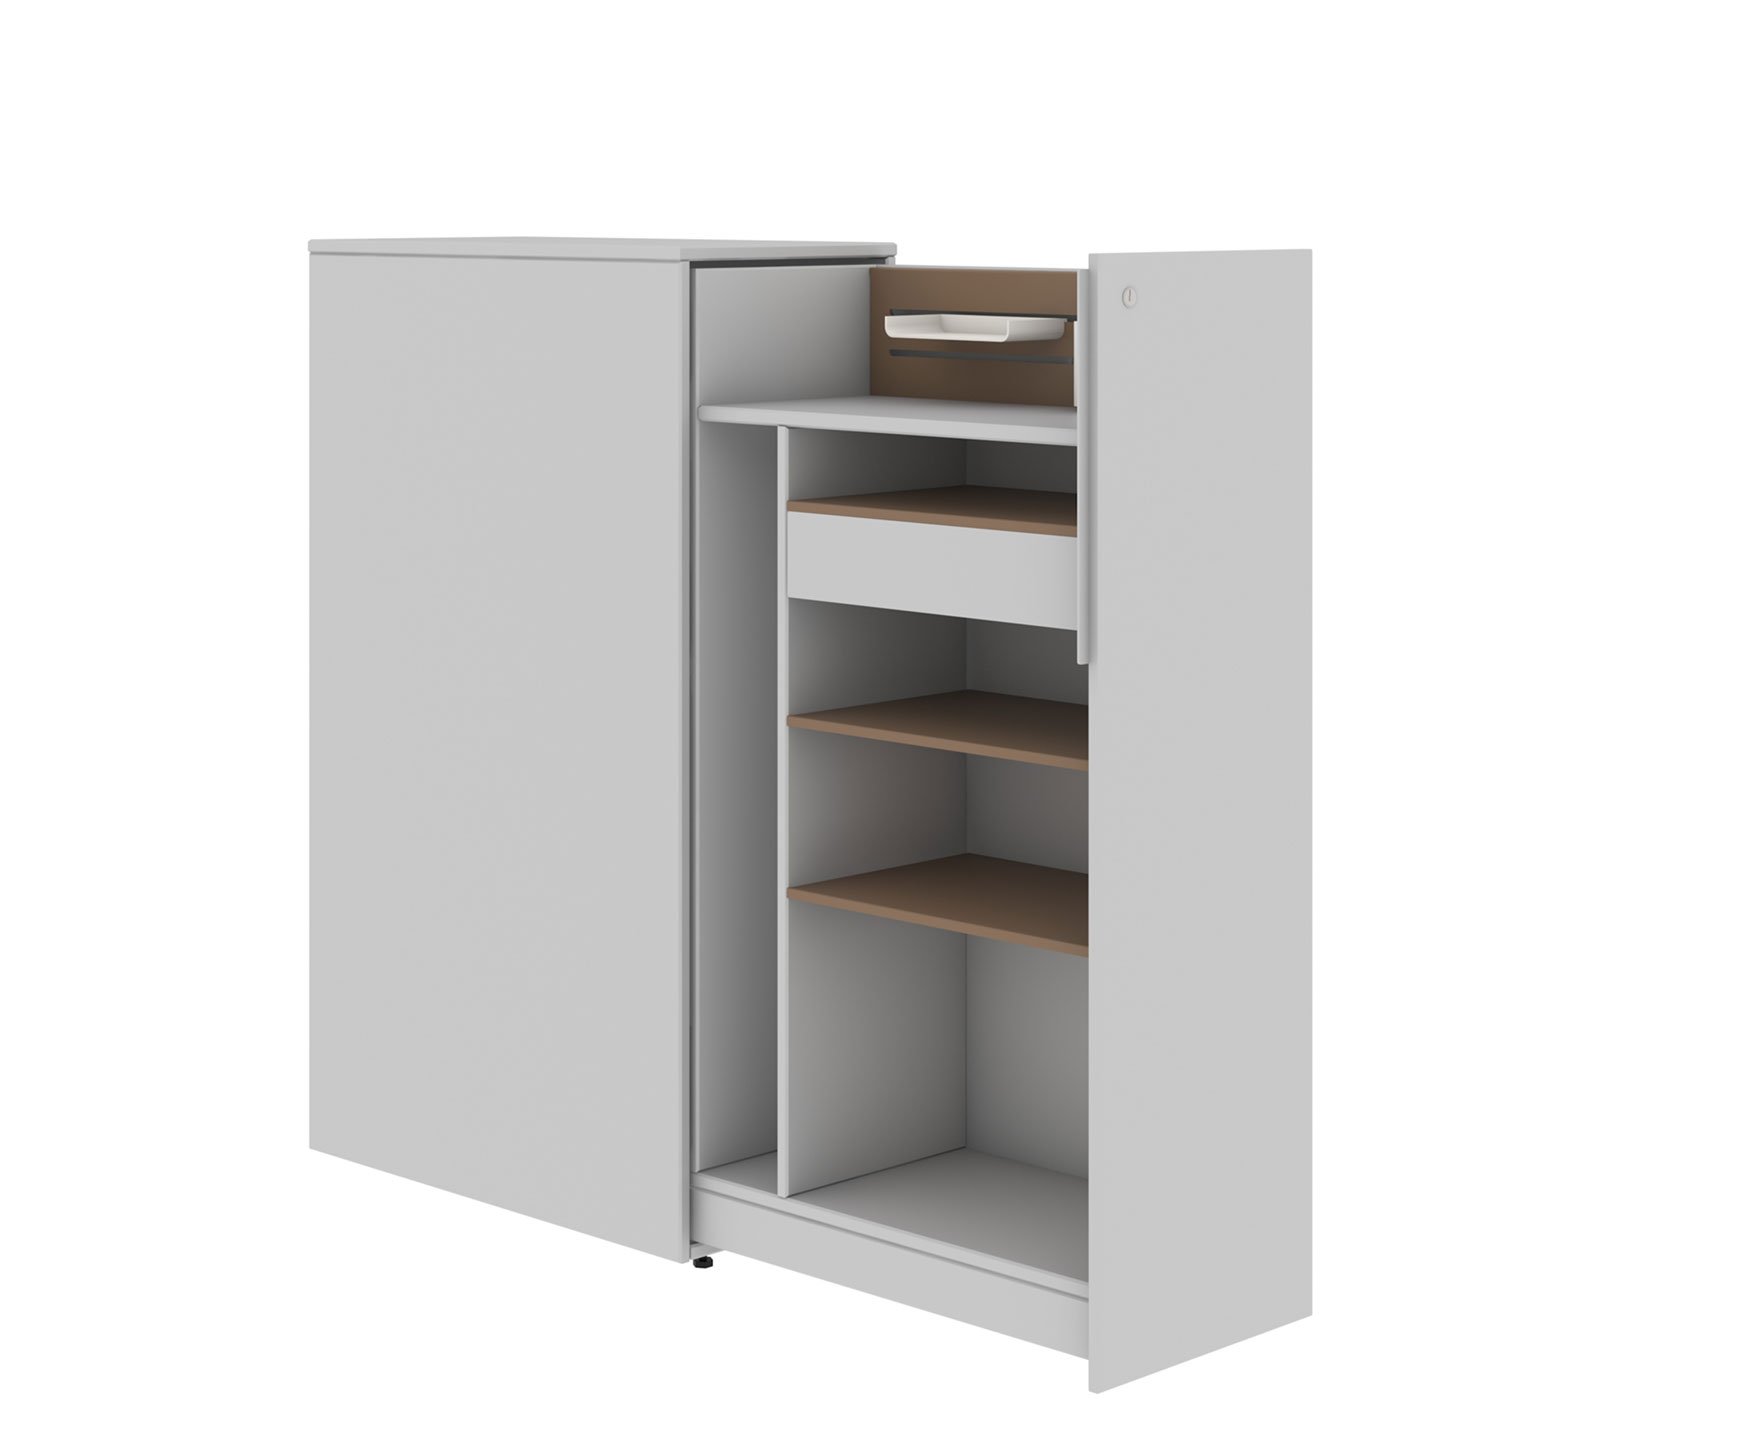 Beside Storage Pantry in gray with wooden shelves and lock sliding door